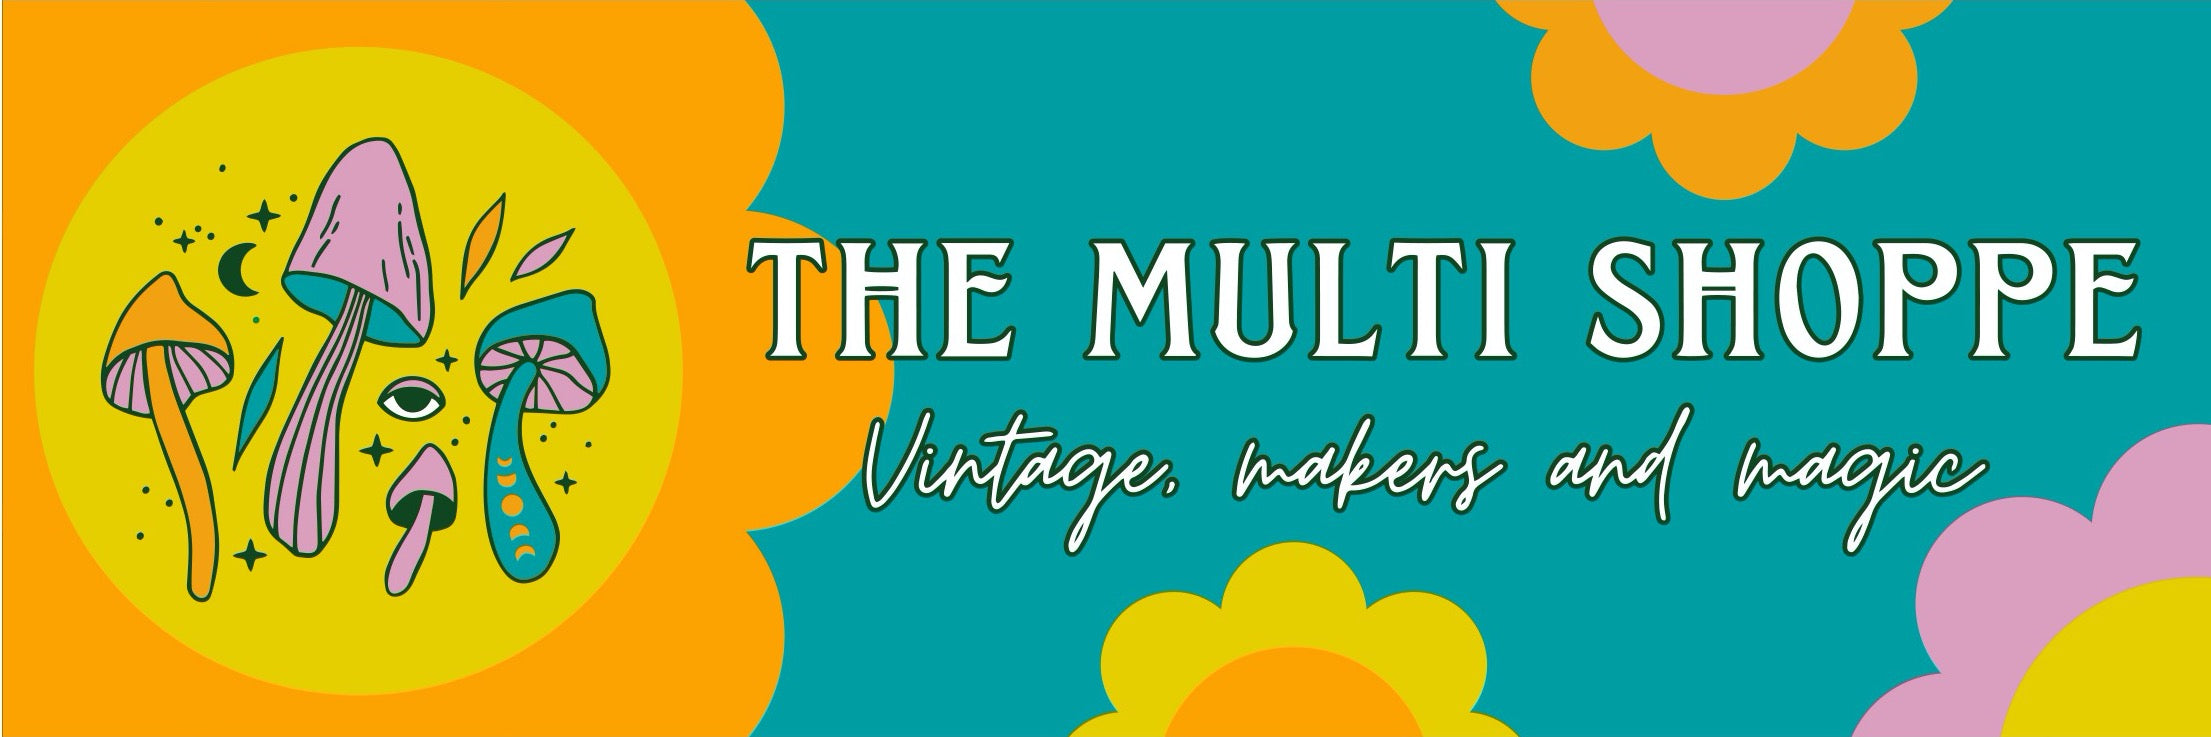 Vintage for All! – The Multi Shoppe; Vintage, Makers and Magic